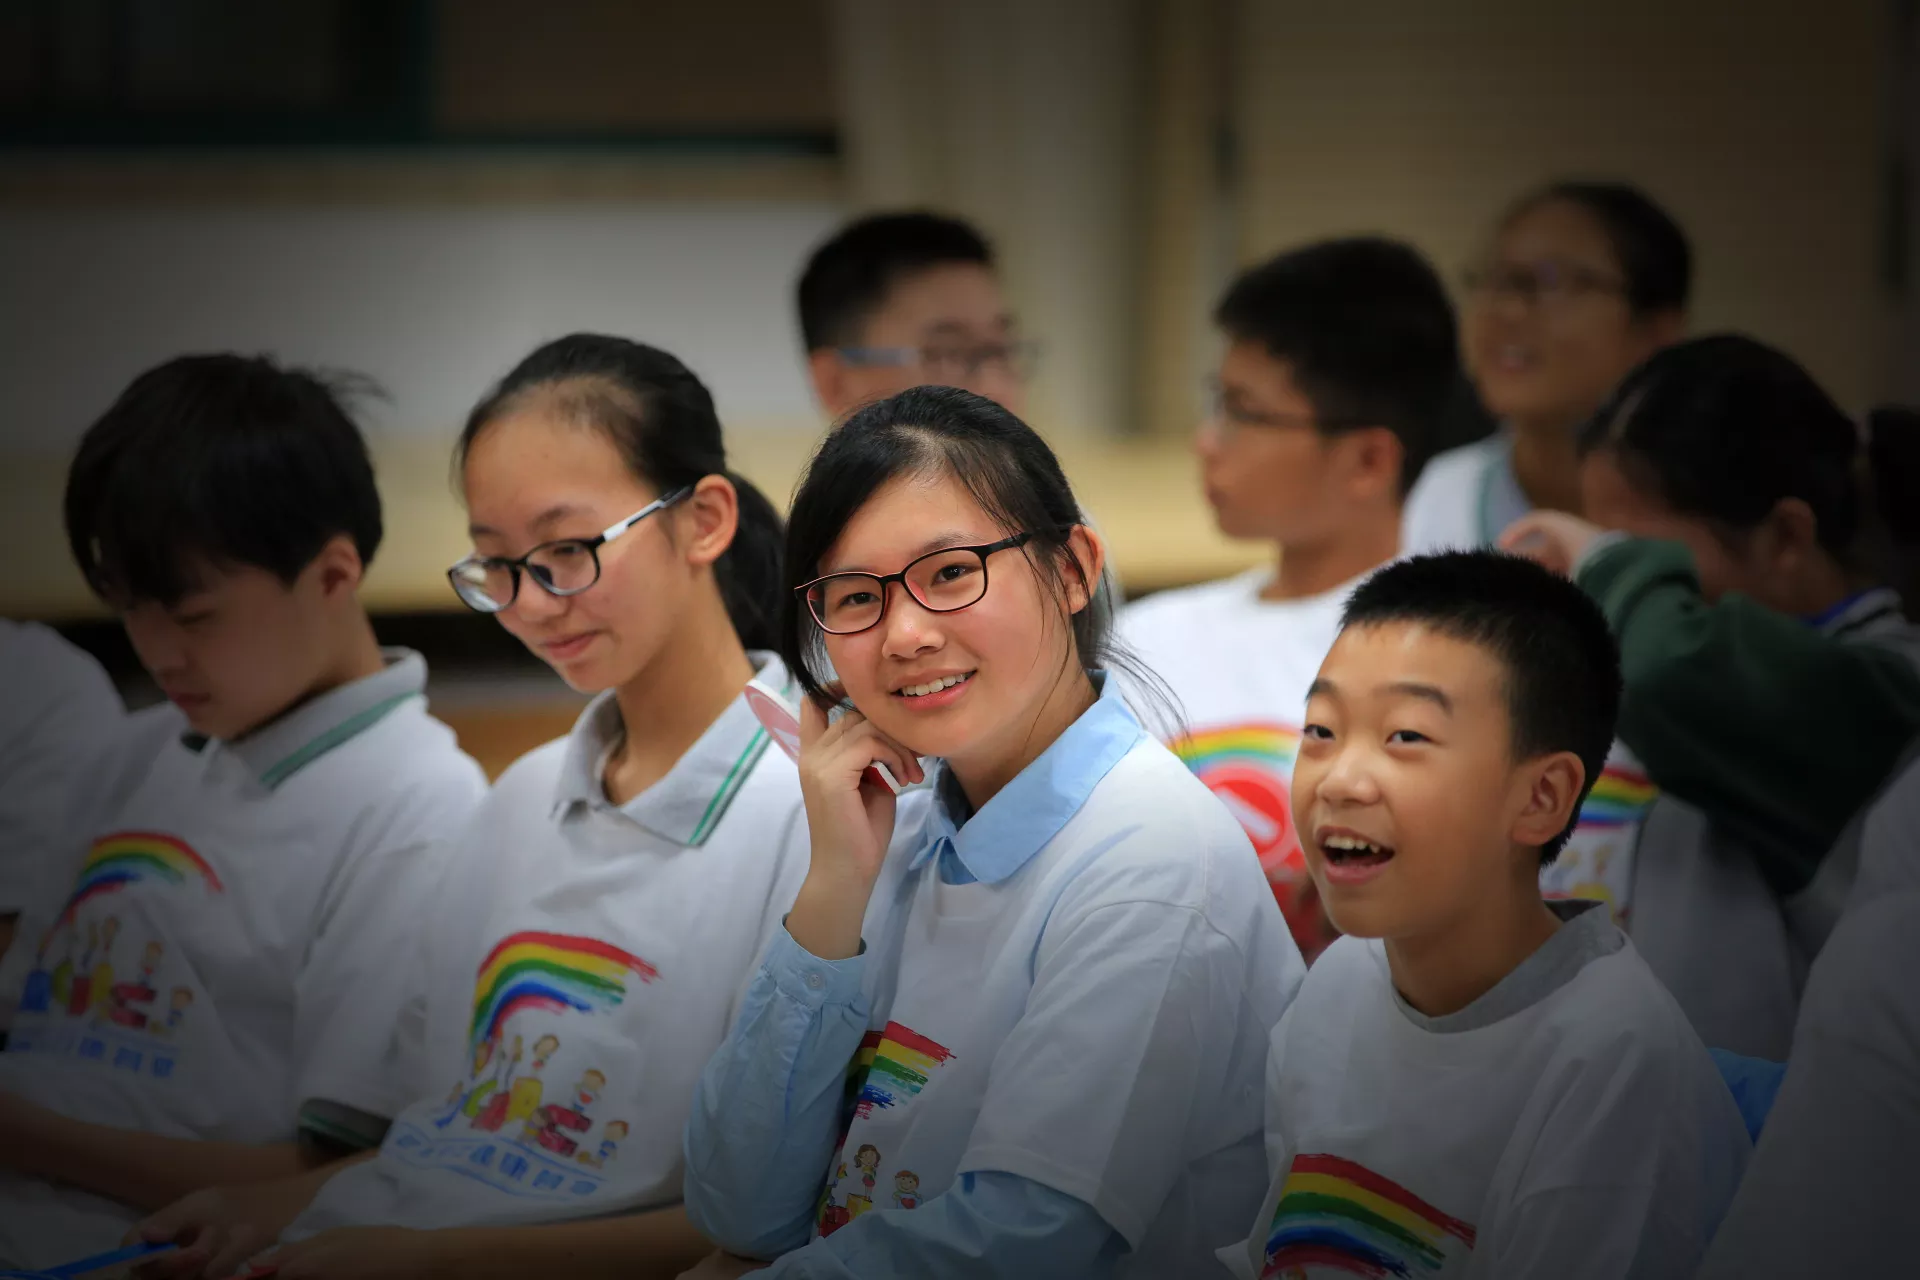 In Jiaxin city, Zhejiang Province of China, a group of adolescent girls and boys participated in an adolescent mental health camp during the national holiday in October.